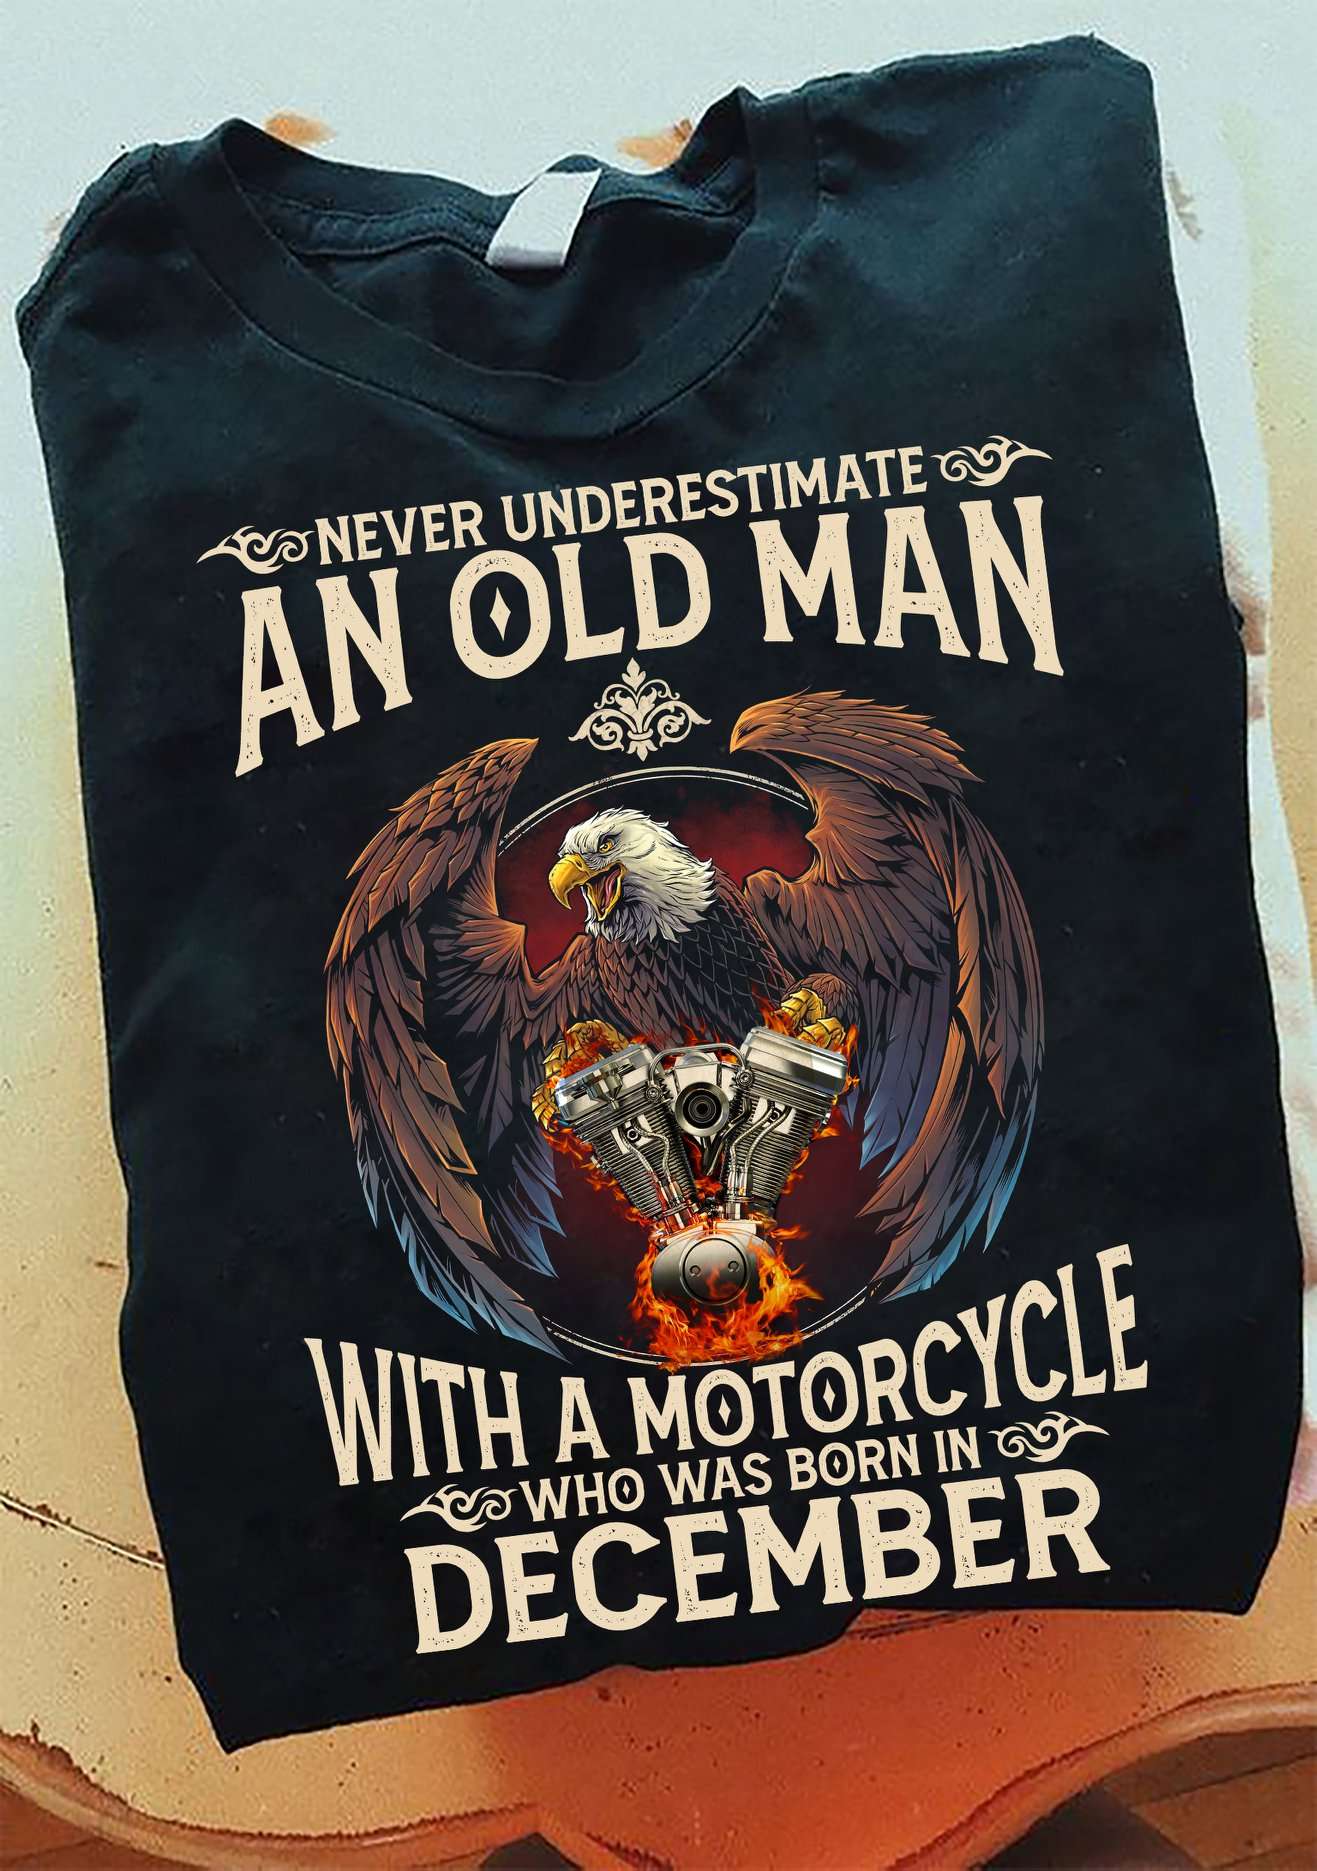 Never underestimate an old man with a motorcycle who was born in December - December biker